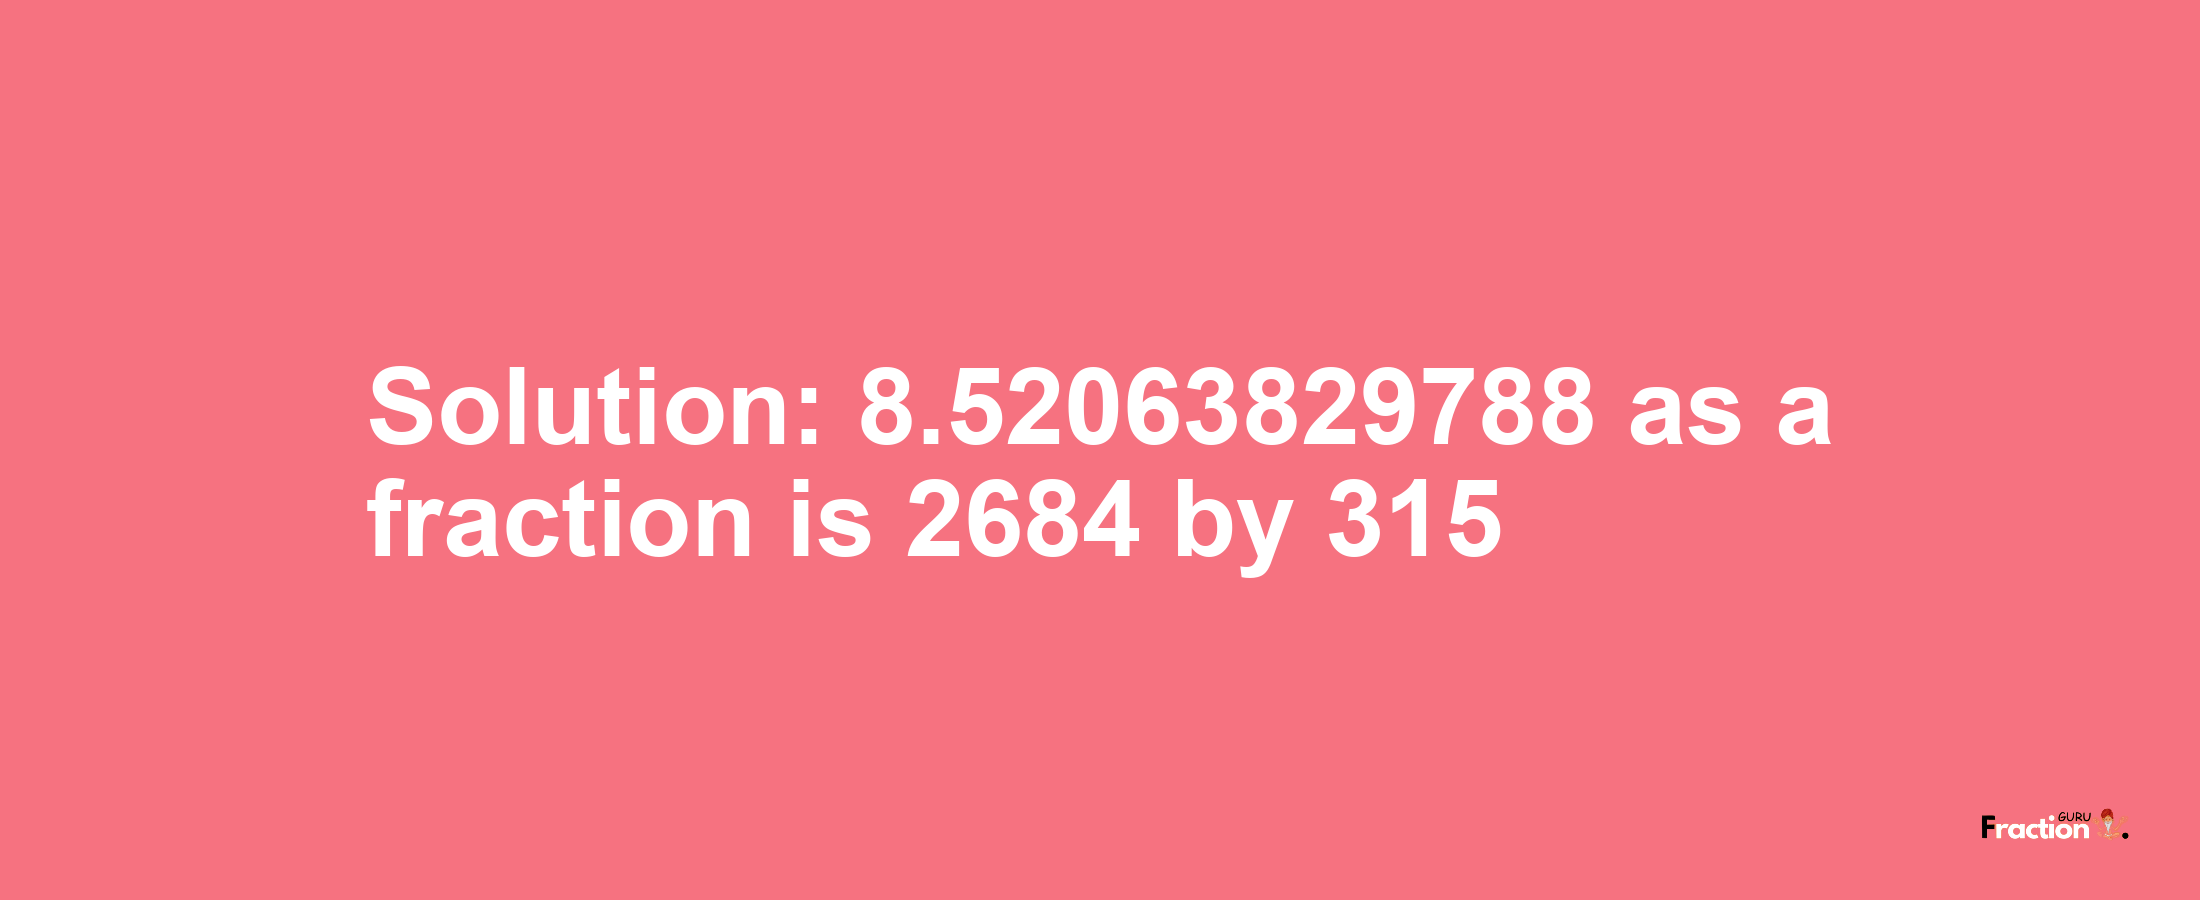 Solution:8.52063829788 as a fraction is 2684/315